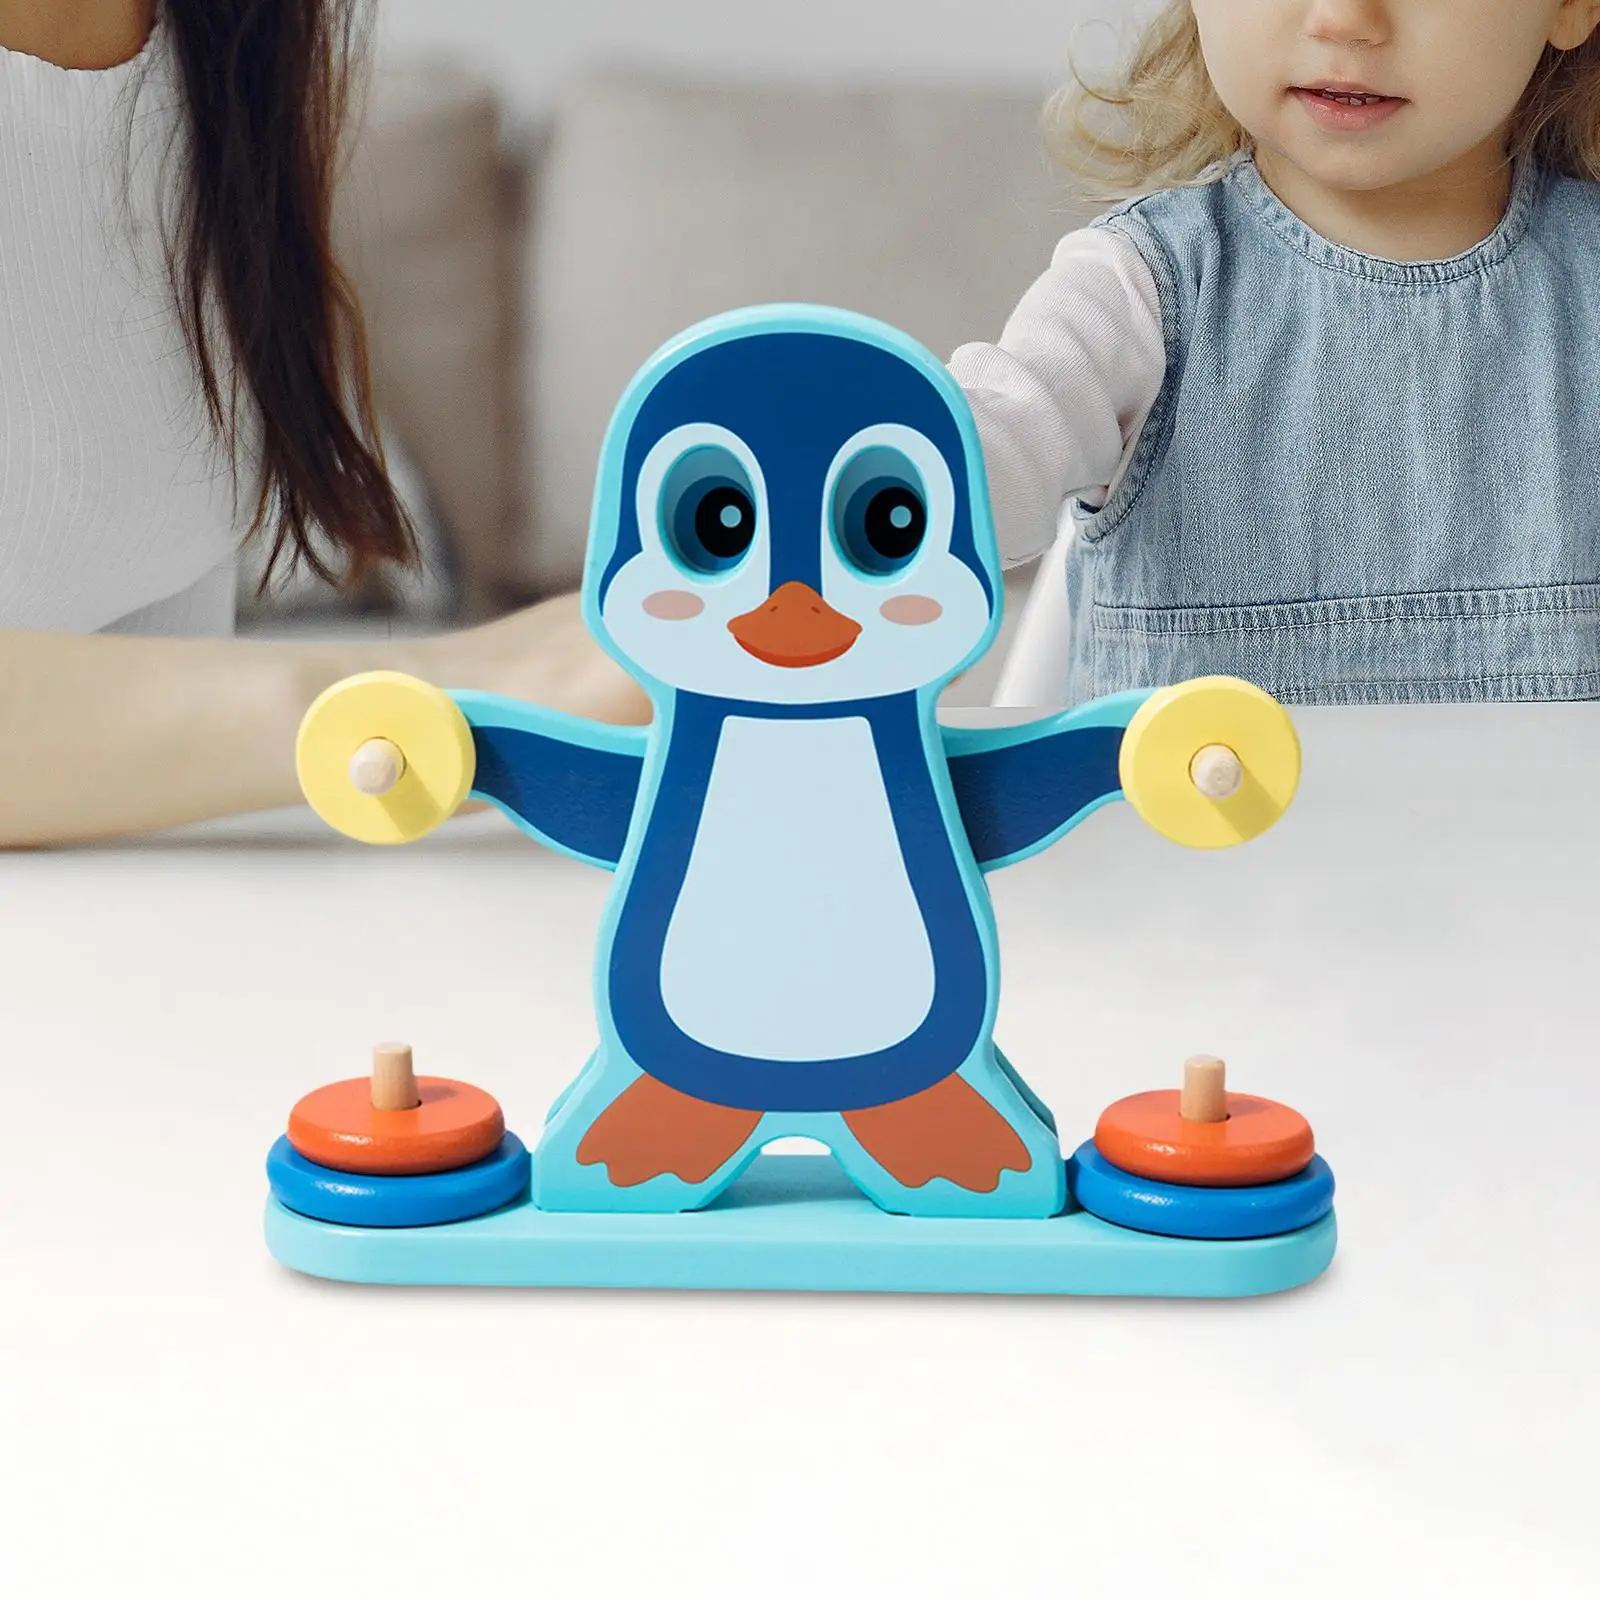 Penguin Balance Counting Game Number Recognition Math Scale Toy Kids Enlightenment Toy for Math Toy Boys Girls Preschoolers Kids